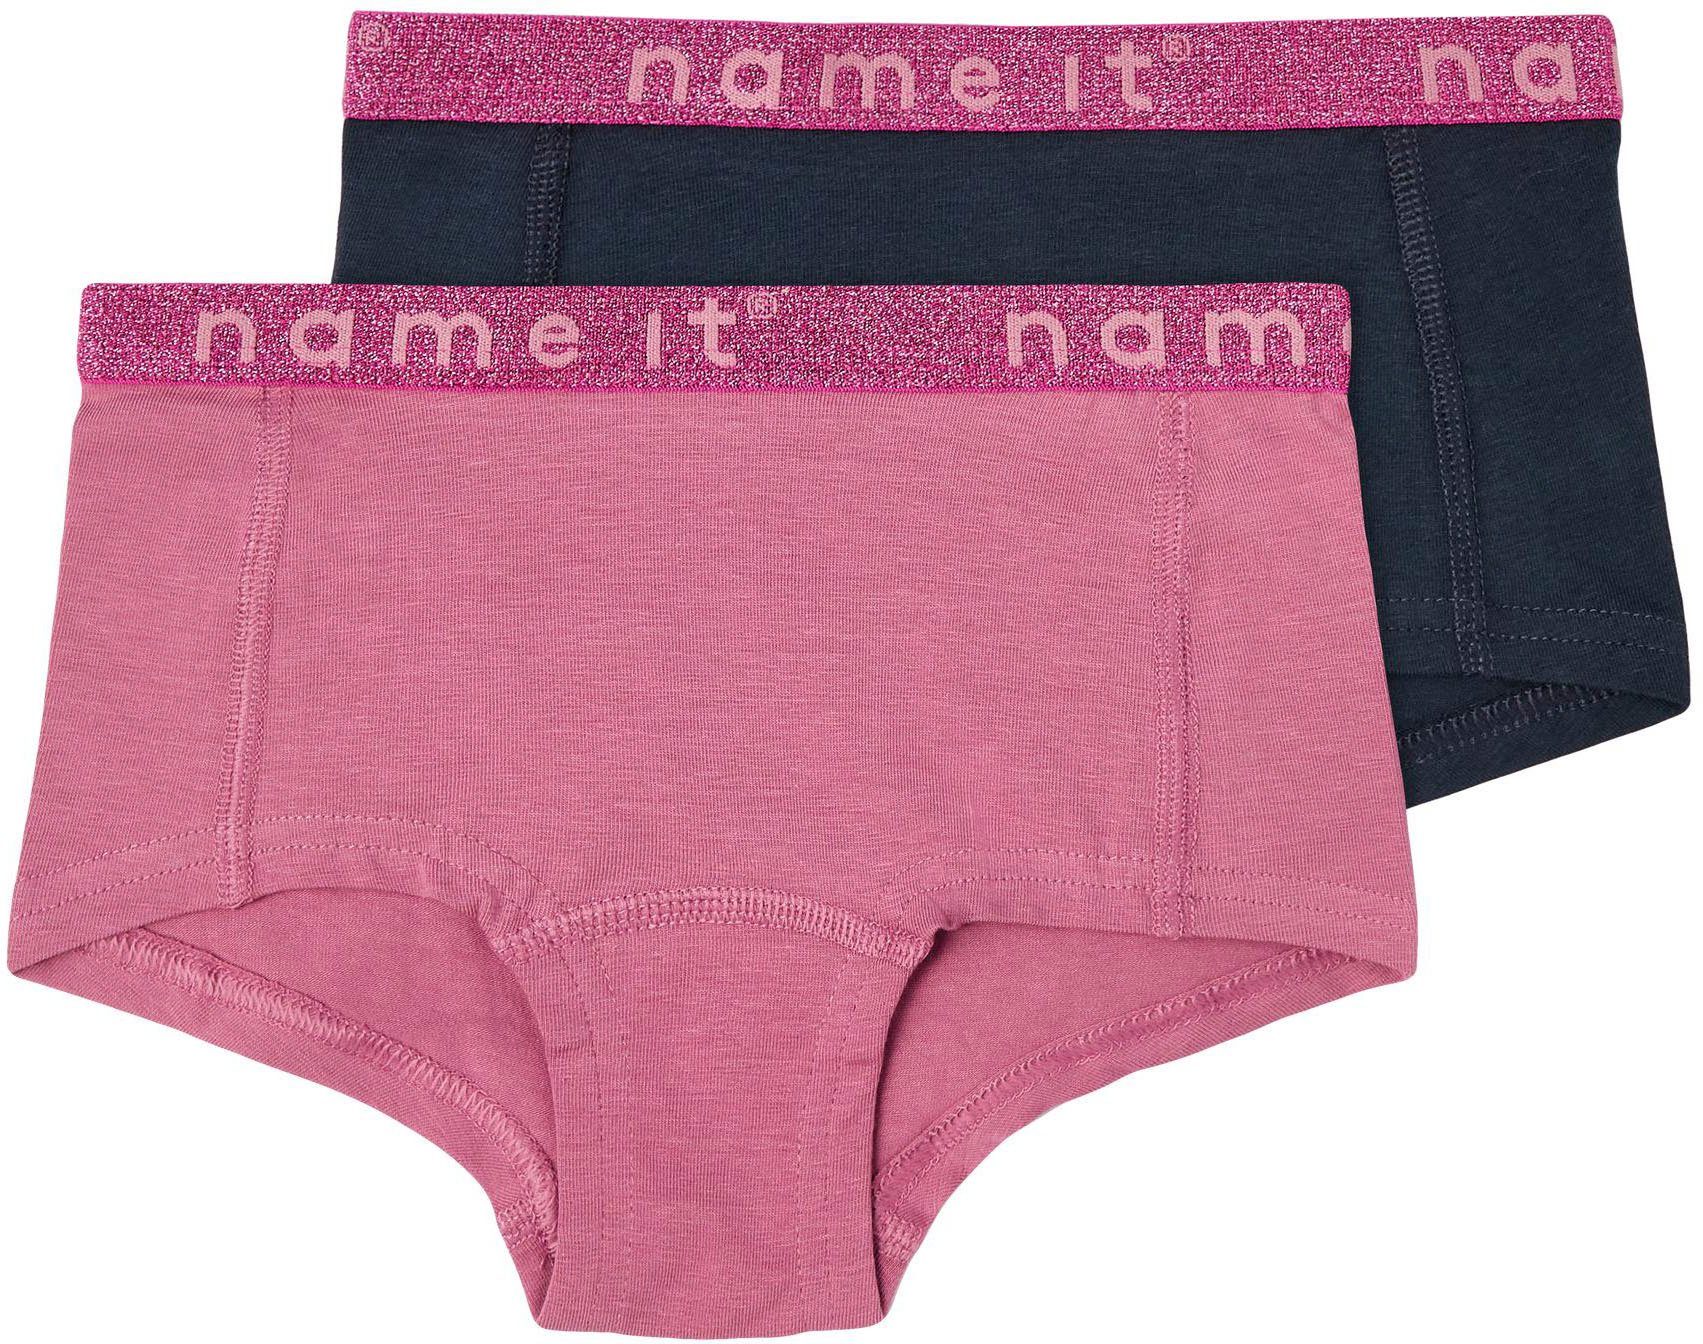 rose Name heather 2-St) Slip It (Packung,